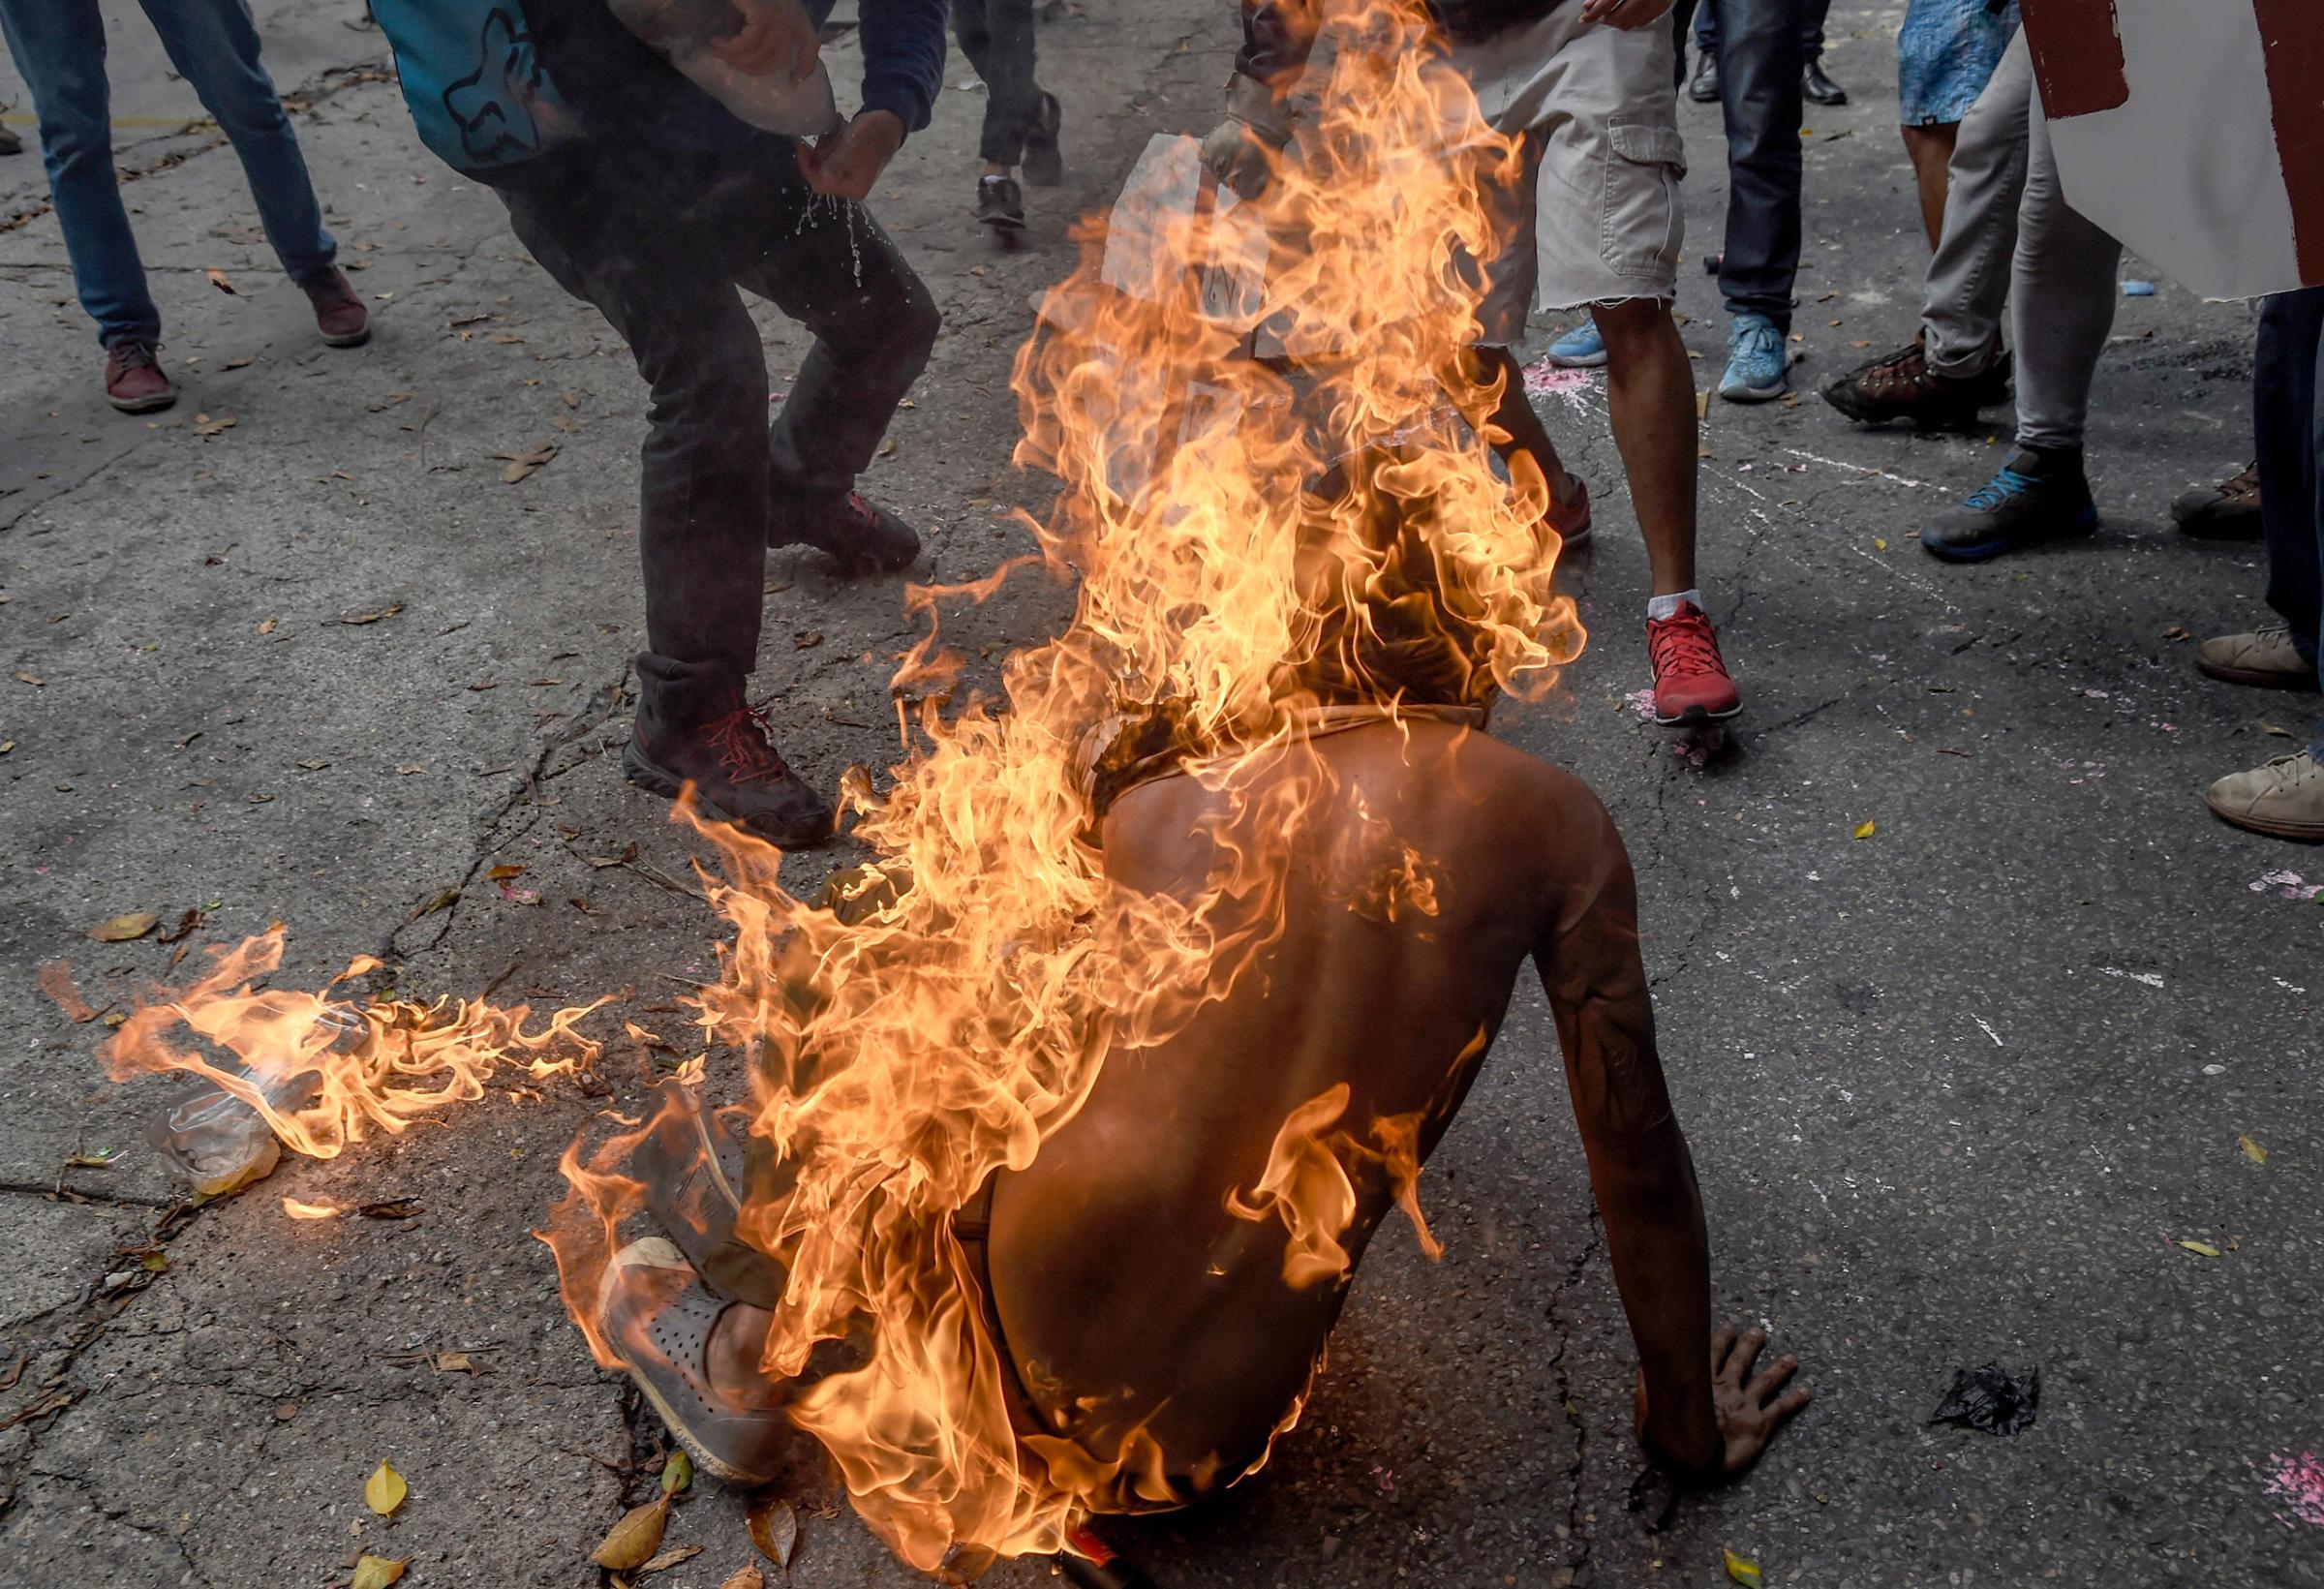 The man falls to the ground as others rush to his aid in Caracas on May 3, 2017.